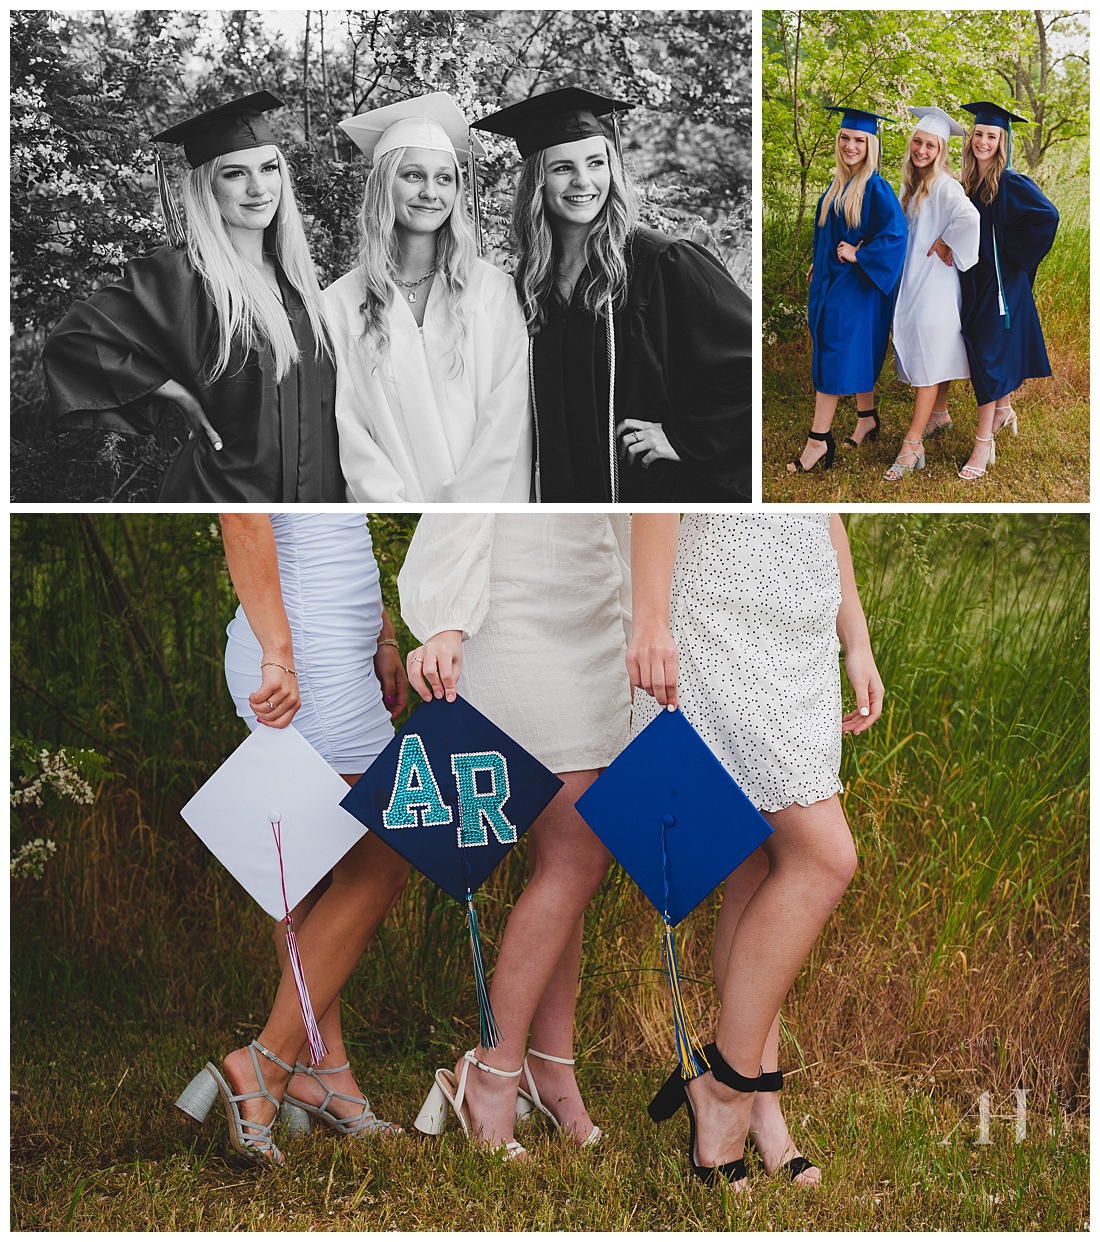 Customized Cap and Gown Portraits | Ideas for Celebrating Graduation in 2021 | Photographed by Tacoma Senior Photographer Amanda Howse